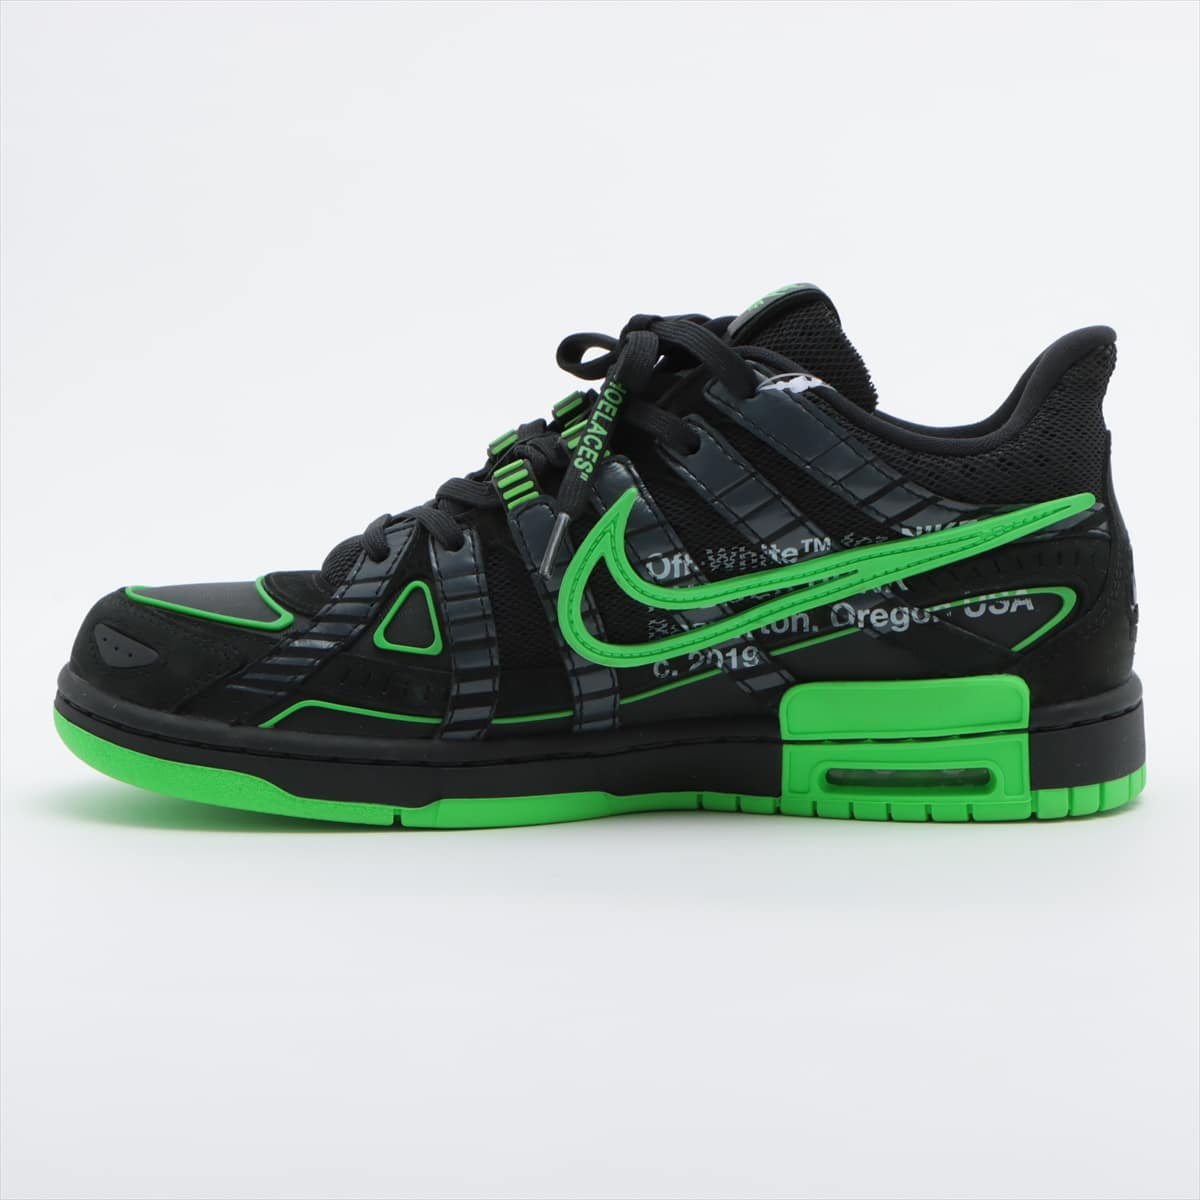 NIKE × OFF-WHITE Leather x fabric Sneakers 8 Men's Green x black CU6015-001 Air Rubber Dunk Green Strike